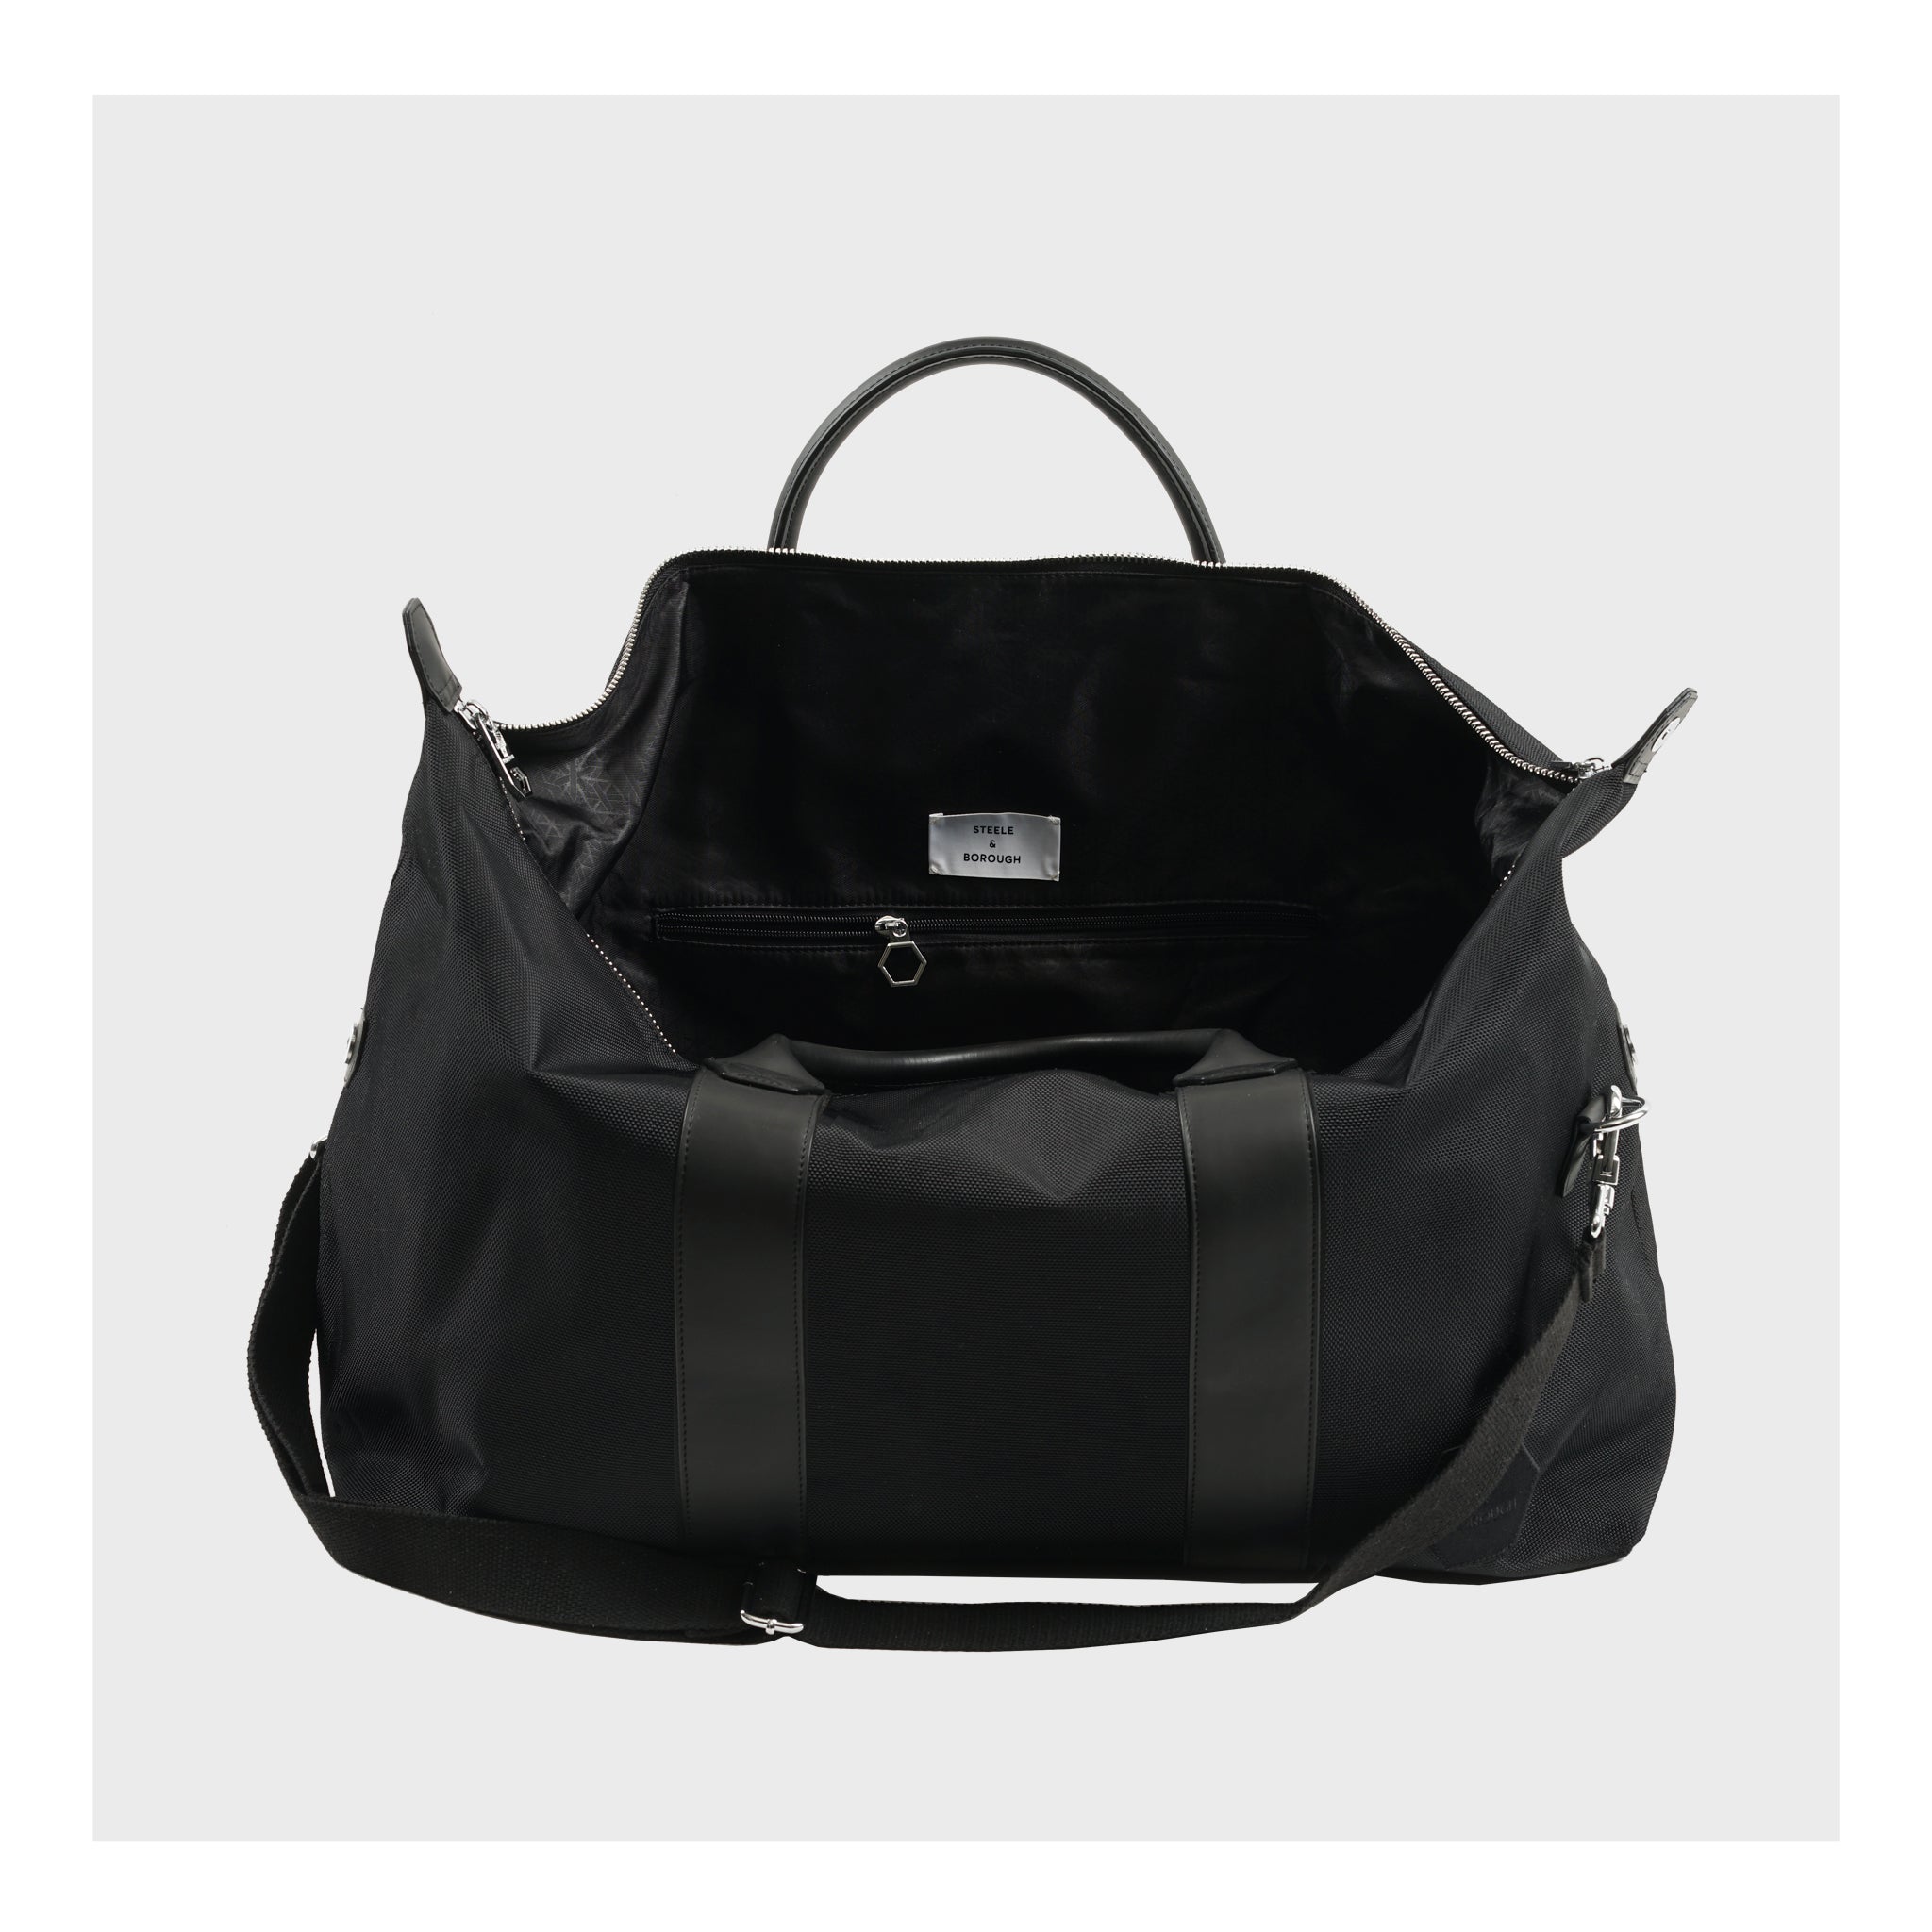 Interior view of the black Weekend Bag, displaying the spacious compartment and internal pockets